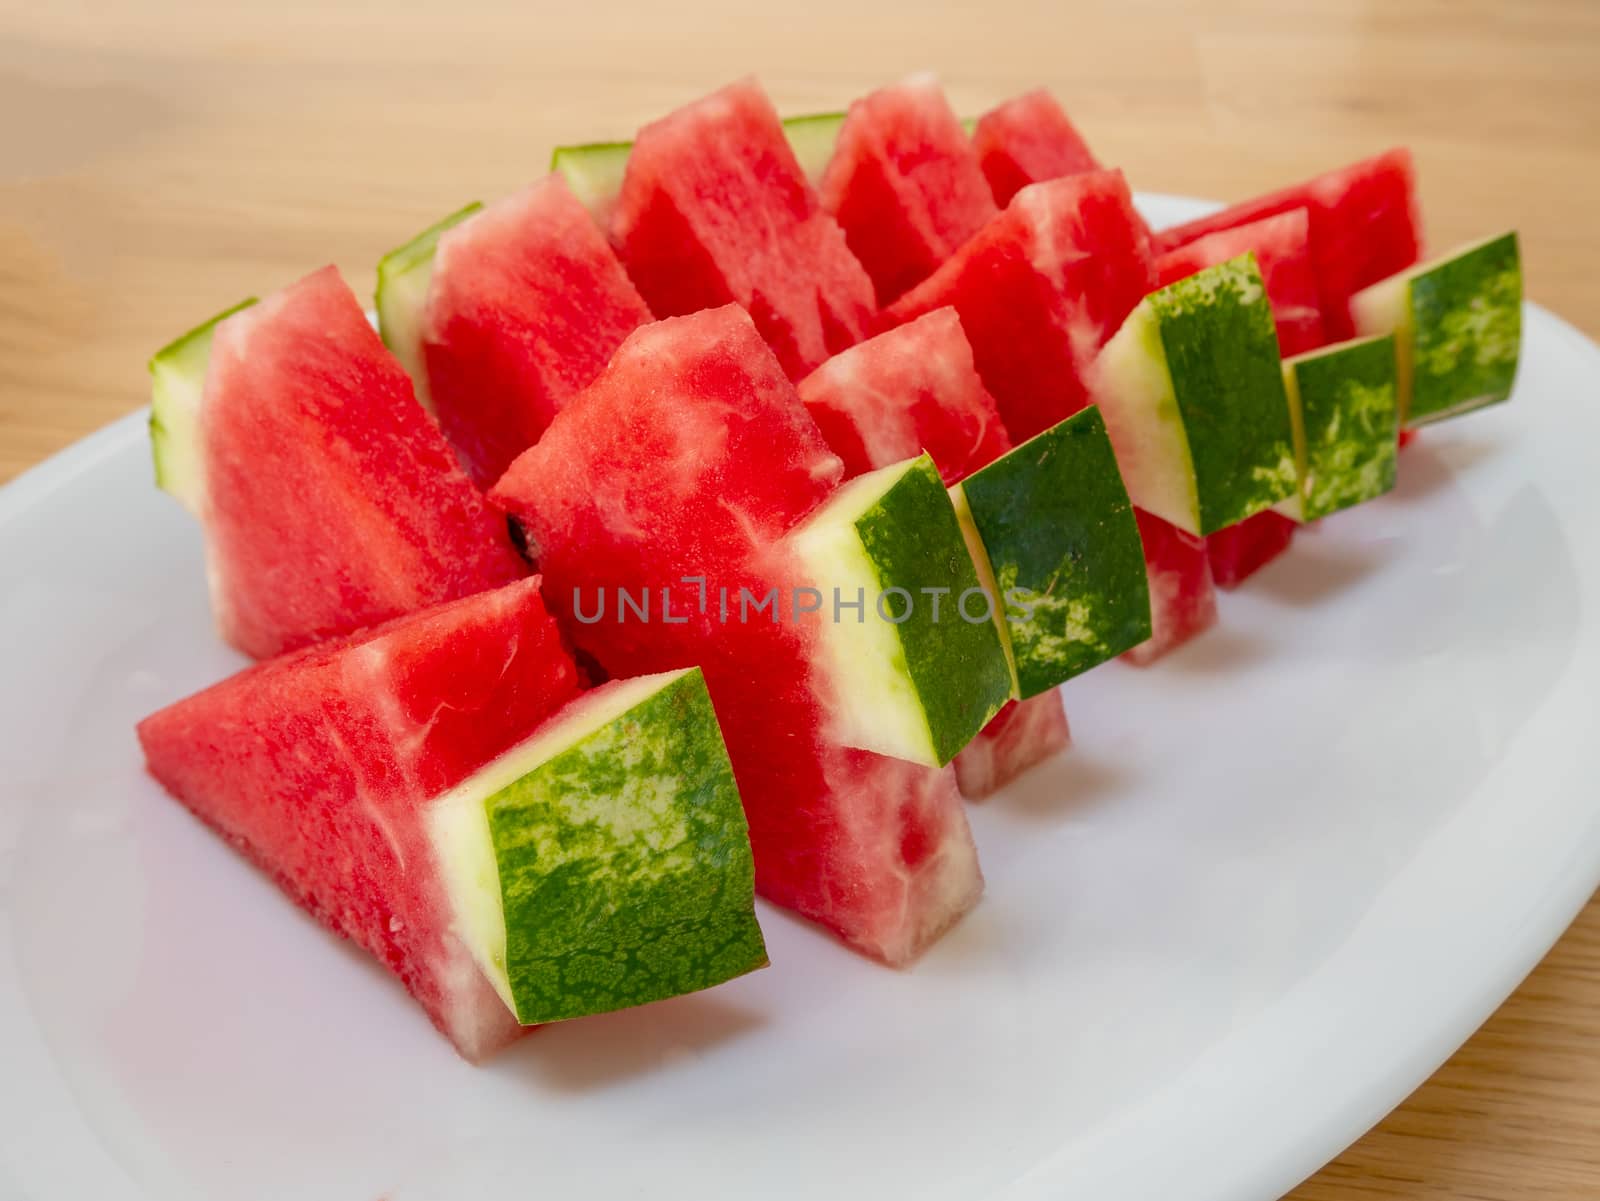 Slices of a ripe watermelon on a plate, Selective focus. by Amankris